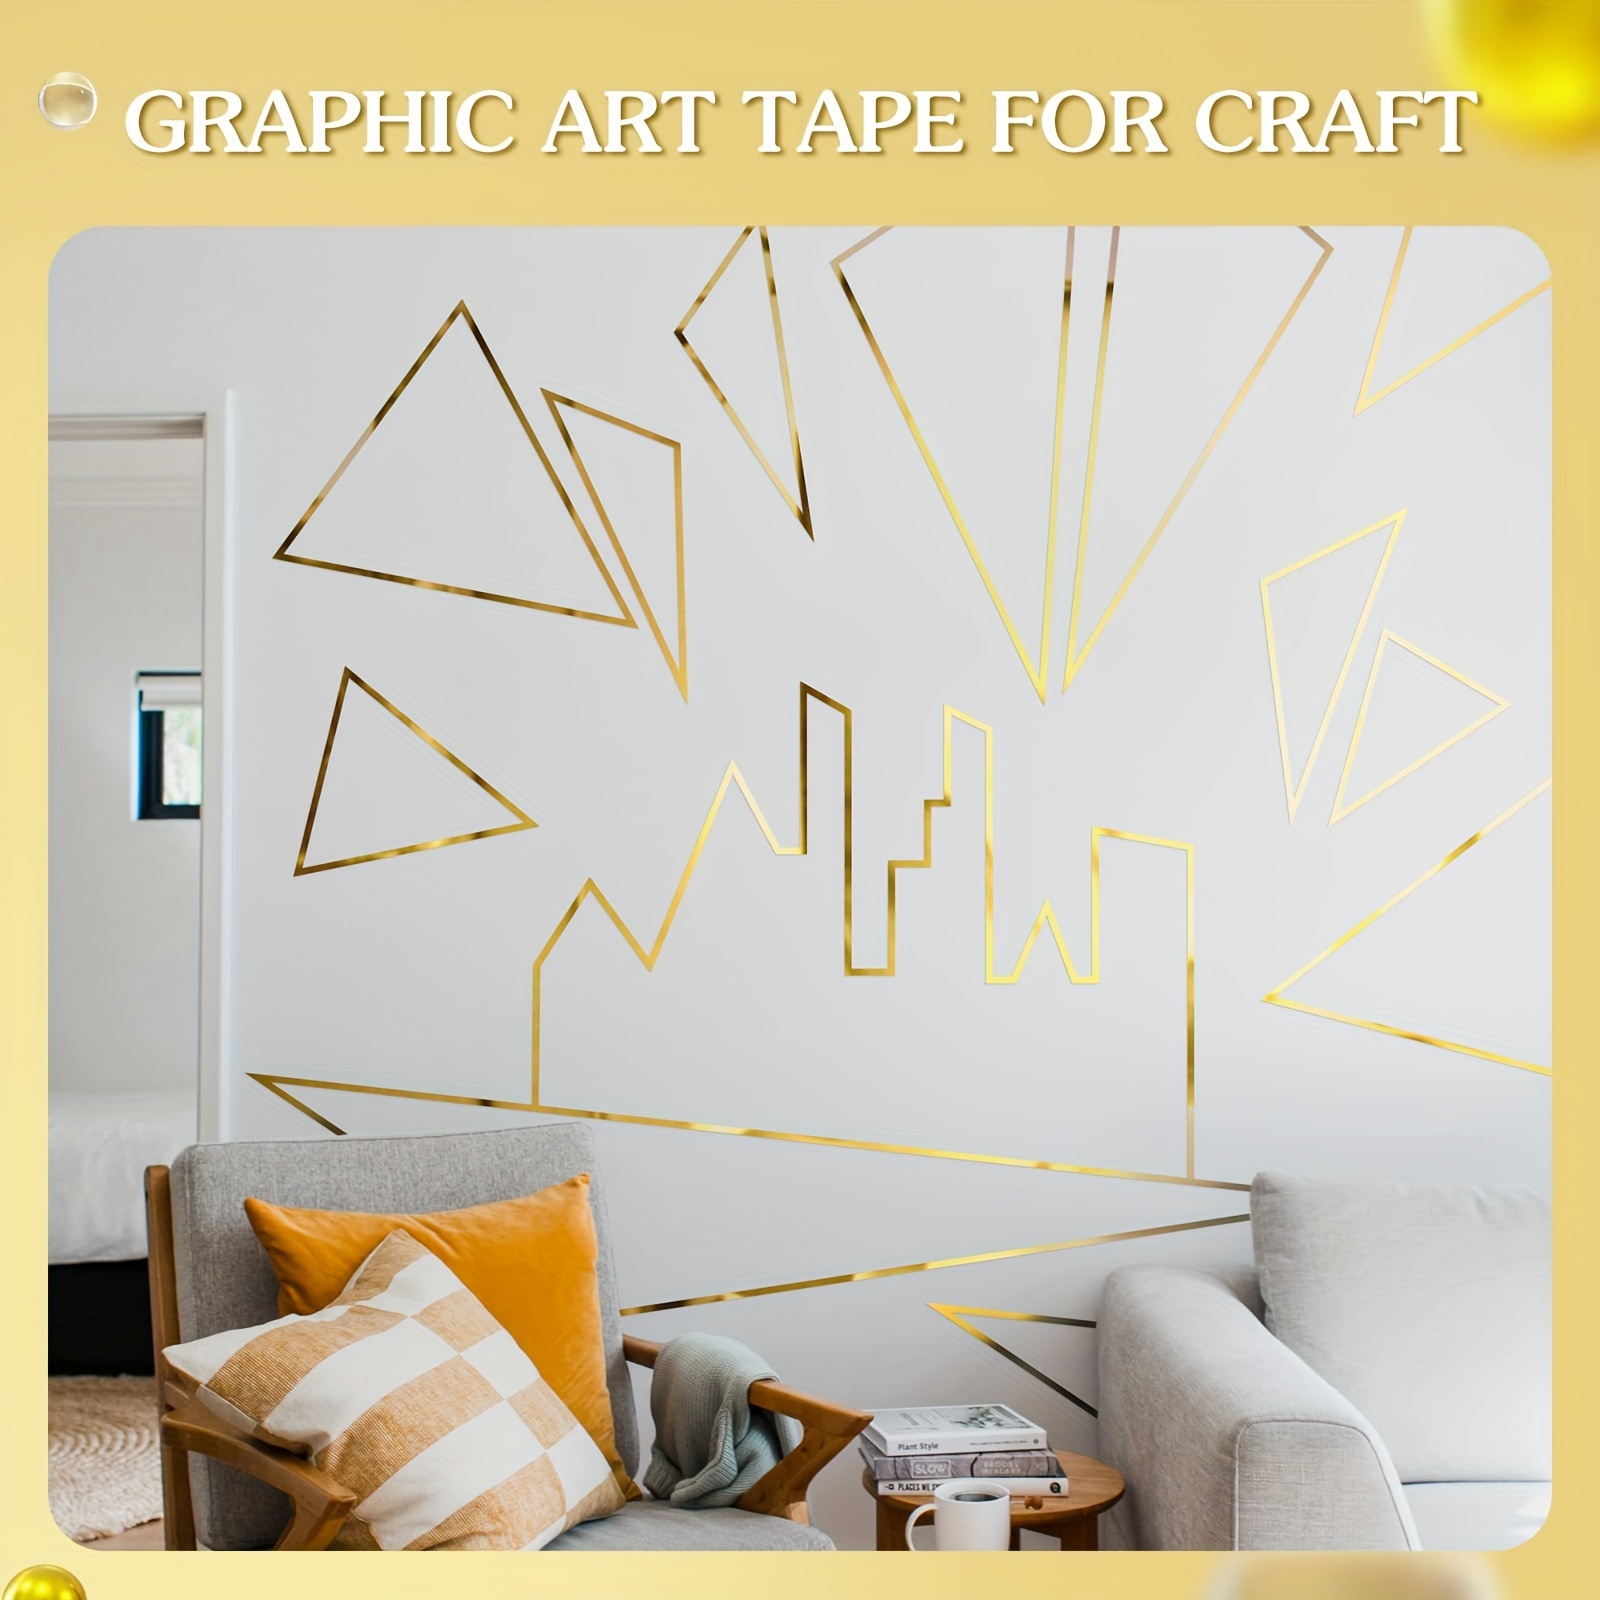 5 Rolls Golden Metallic Mirror Tape For Wall Decor Crafts Graphic